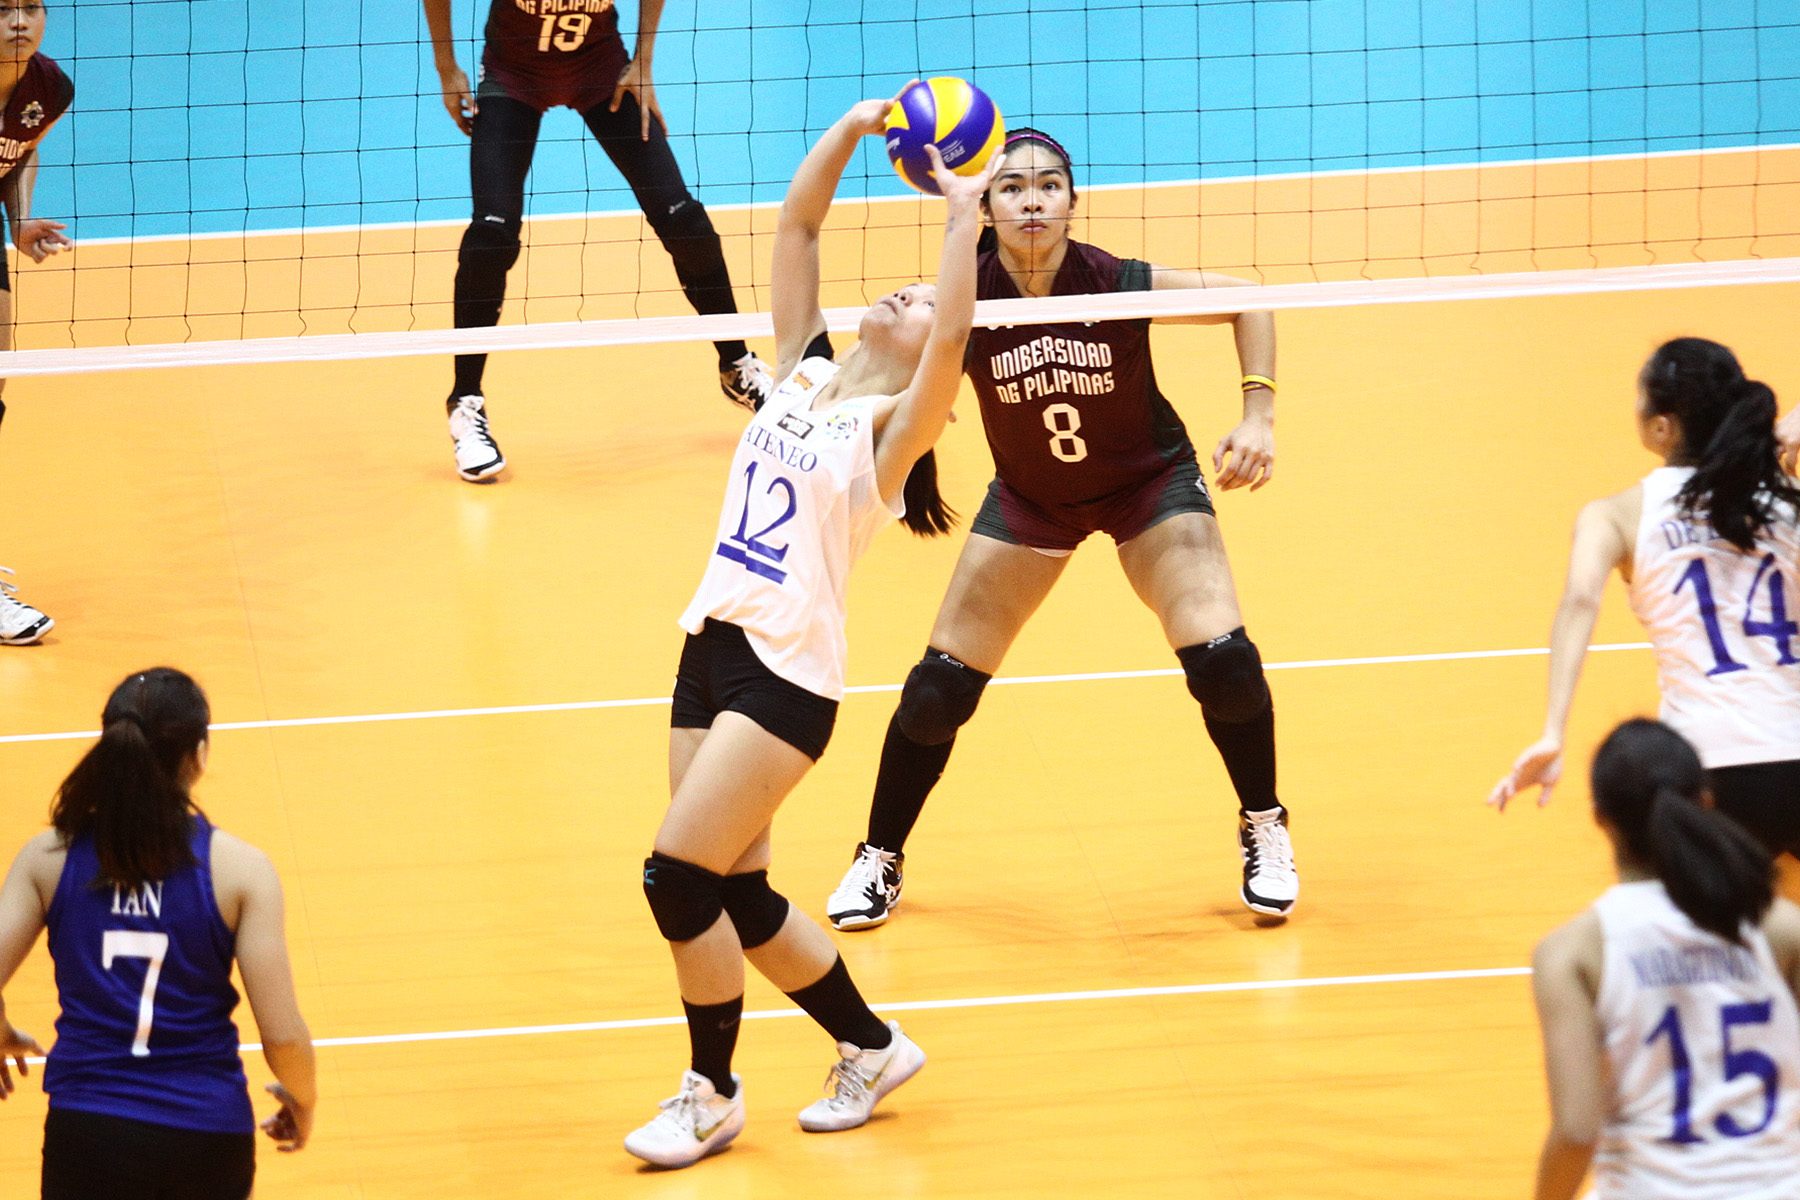 Ateneo Lady Eagles snap UP Lady Maroons’ win streak in straight sets